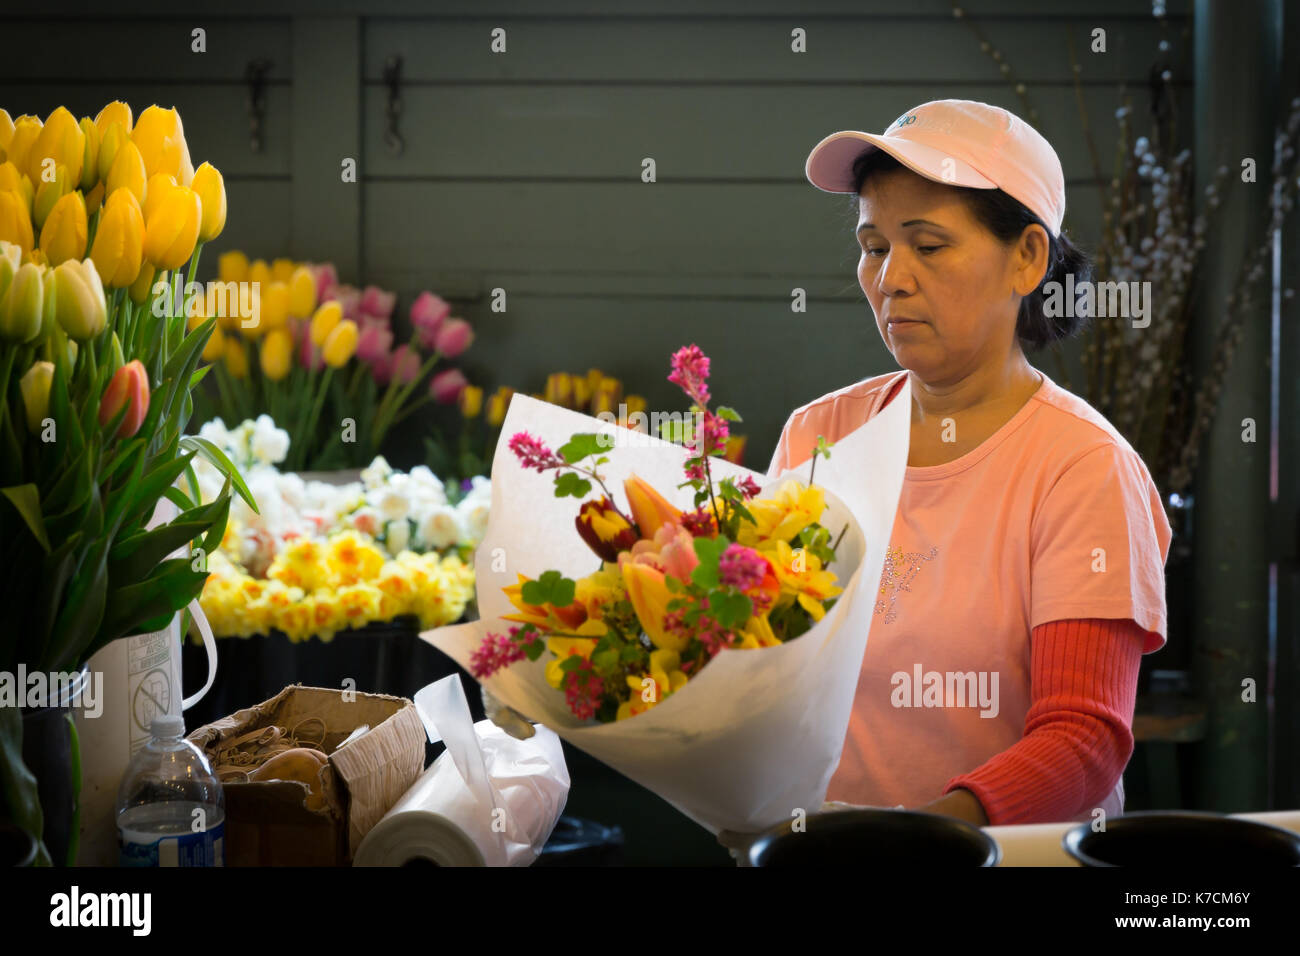 SEATTLE- APR 11, 2014: Unidentified flower vendor at Pikes Place Market arranges a bouquet. The public market is known as a great source of fresh bloo Stock Photo